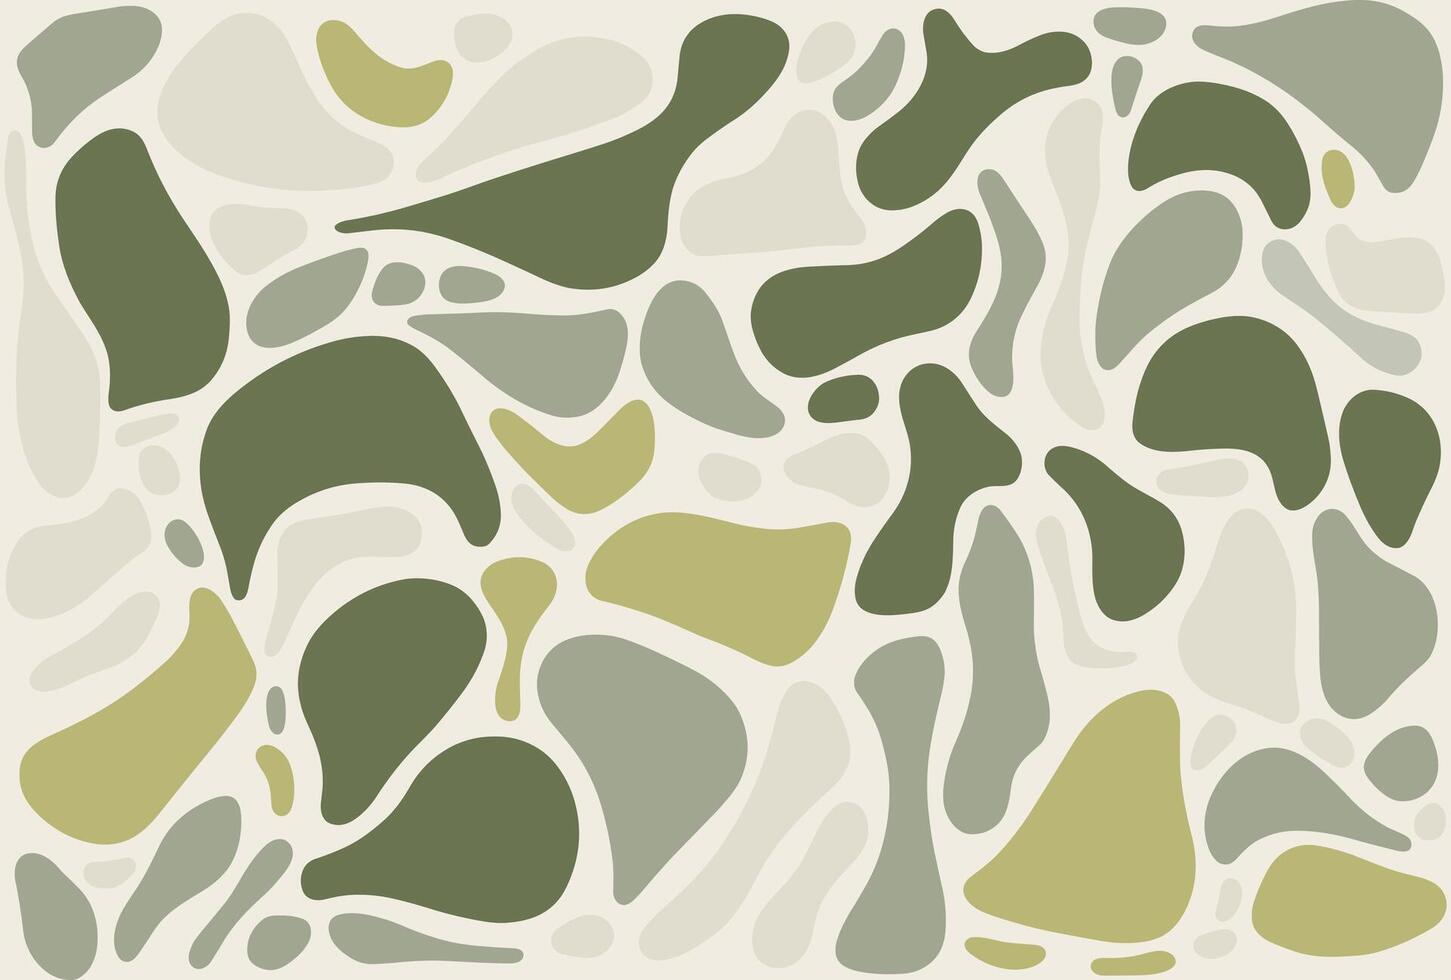 Gray and White Print That Has Four Leaves, in the Style of Organic Biomorphic Forms, Organic Flowing Forms, Light Green and Beige, Fluid Figures, Playful Shapes vector